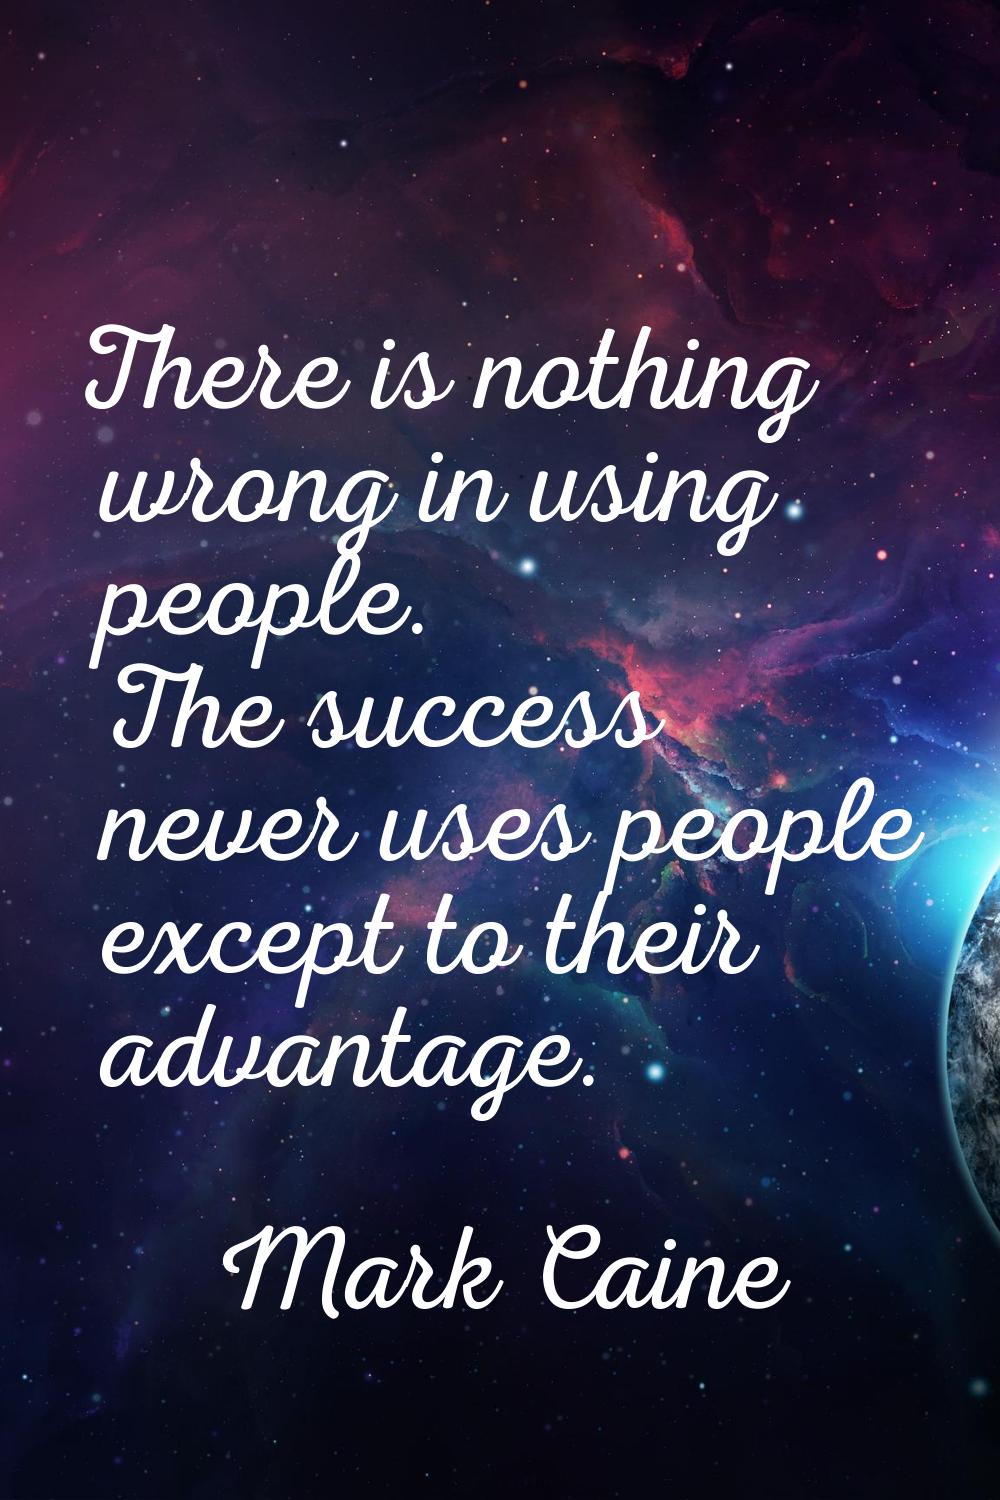 There is nothing wrong in using people. The success never uses people except to their advantage.